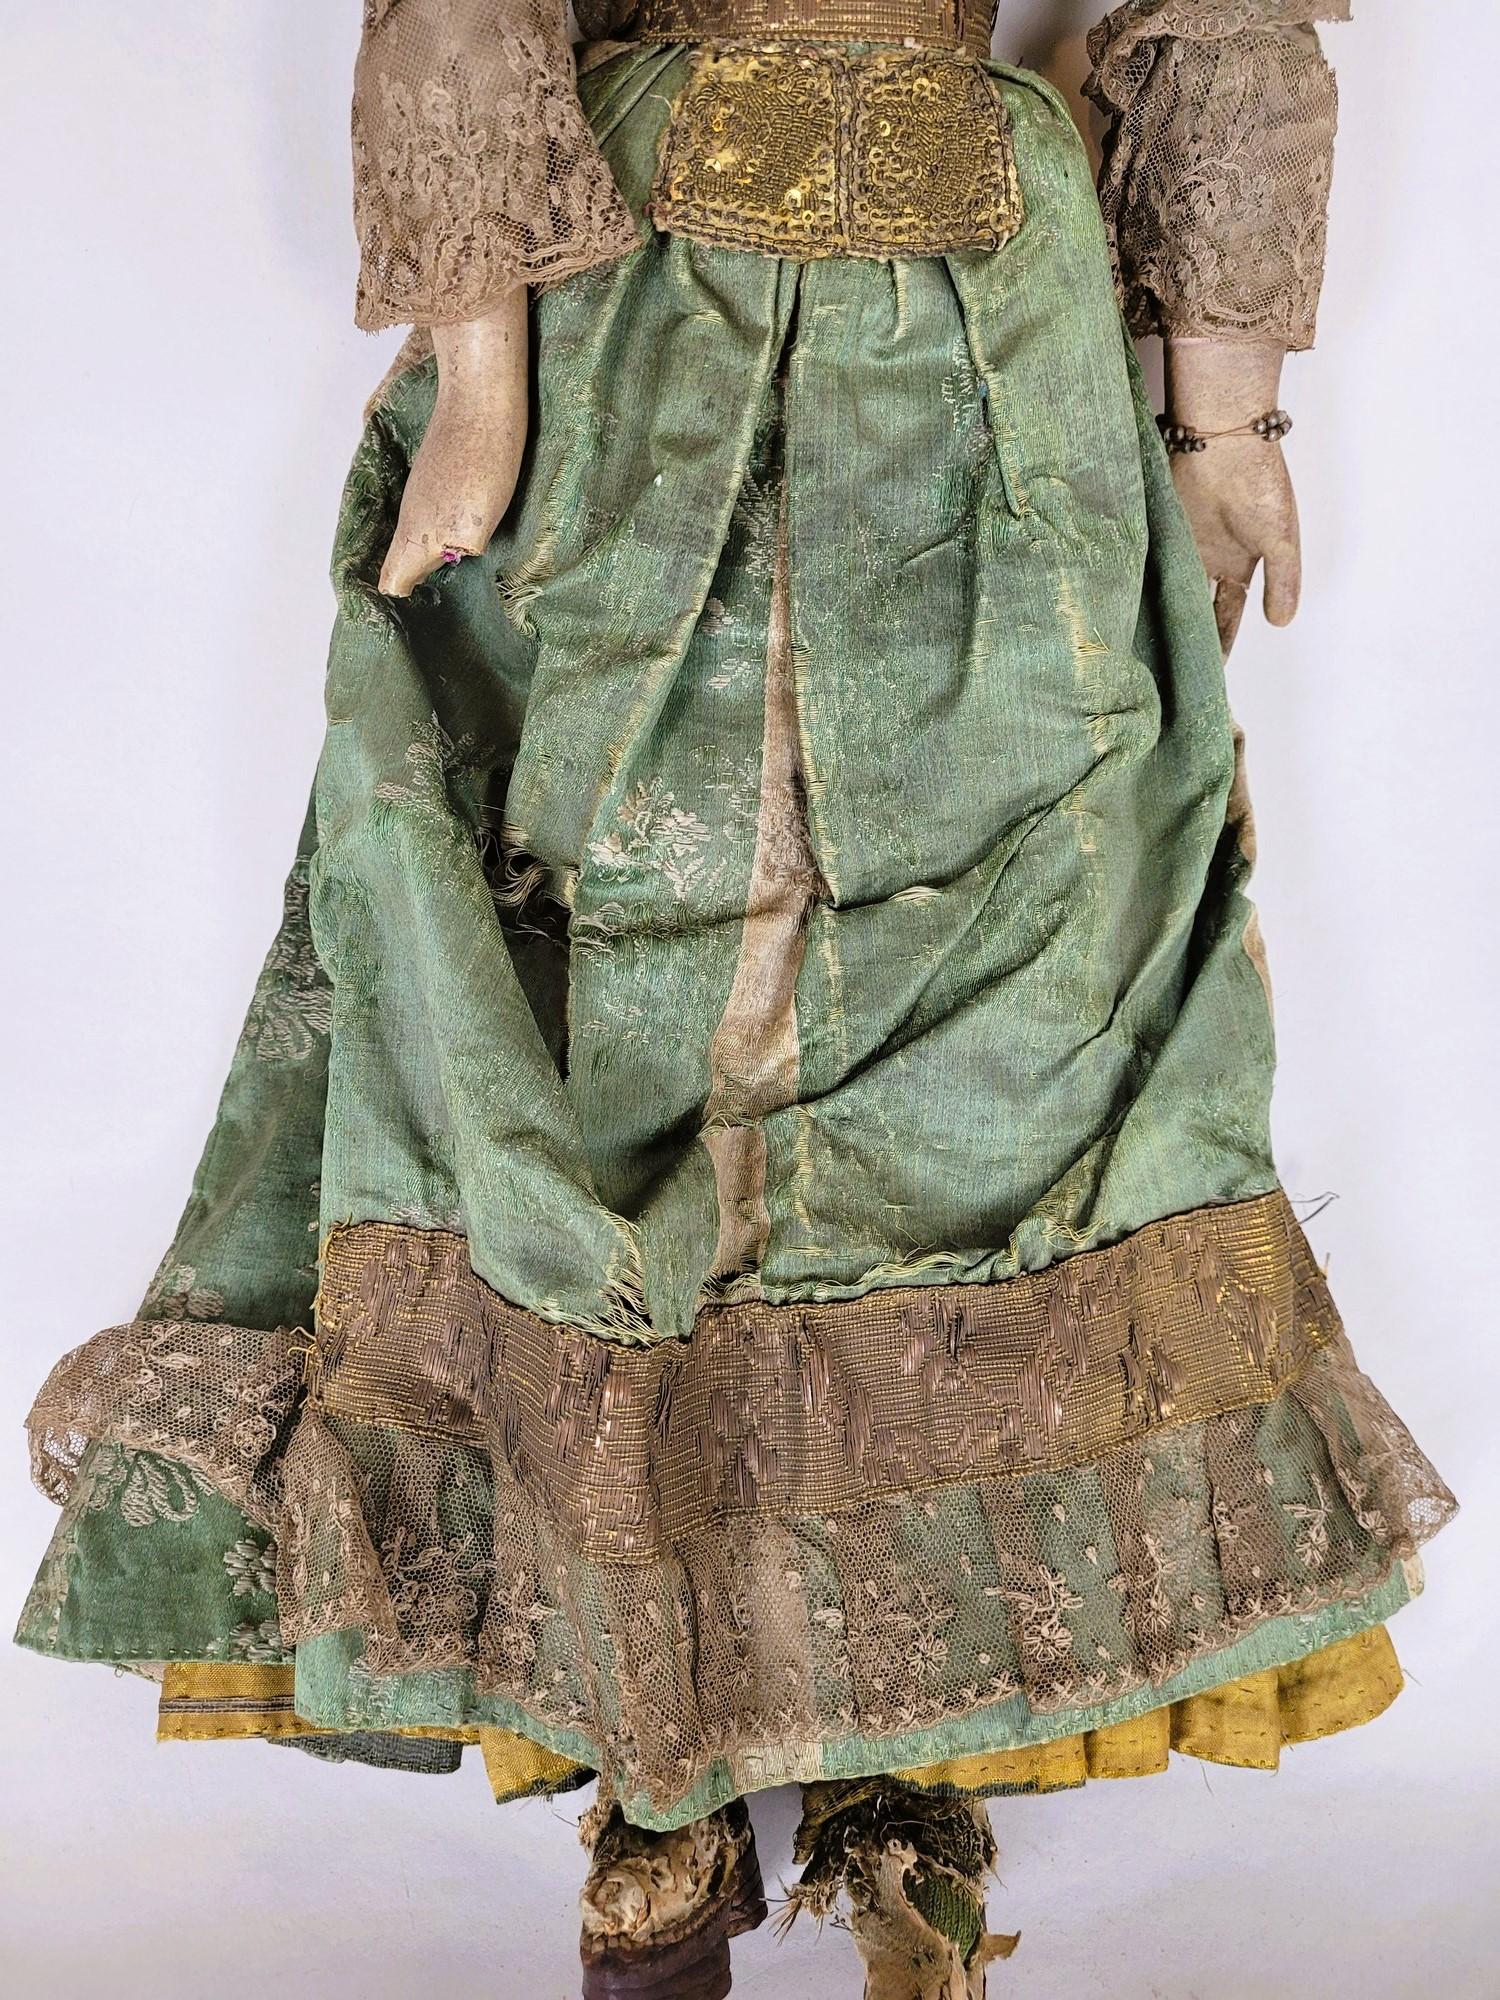 Fabric Articulated Doll, 18th Century For Sale